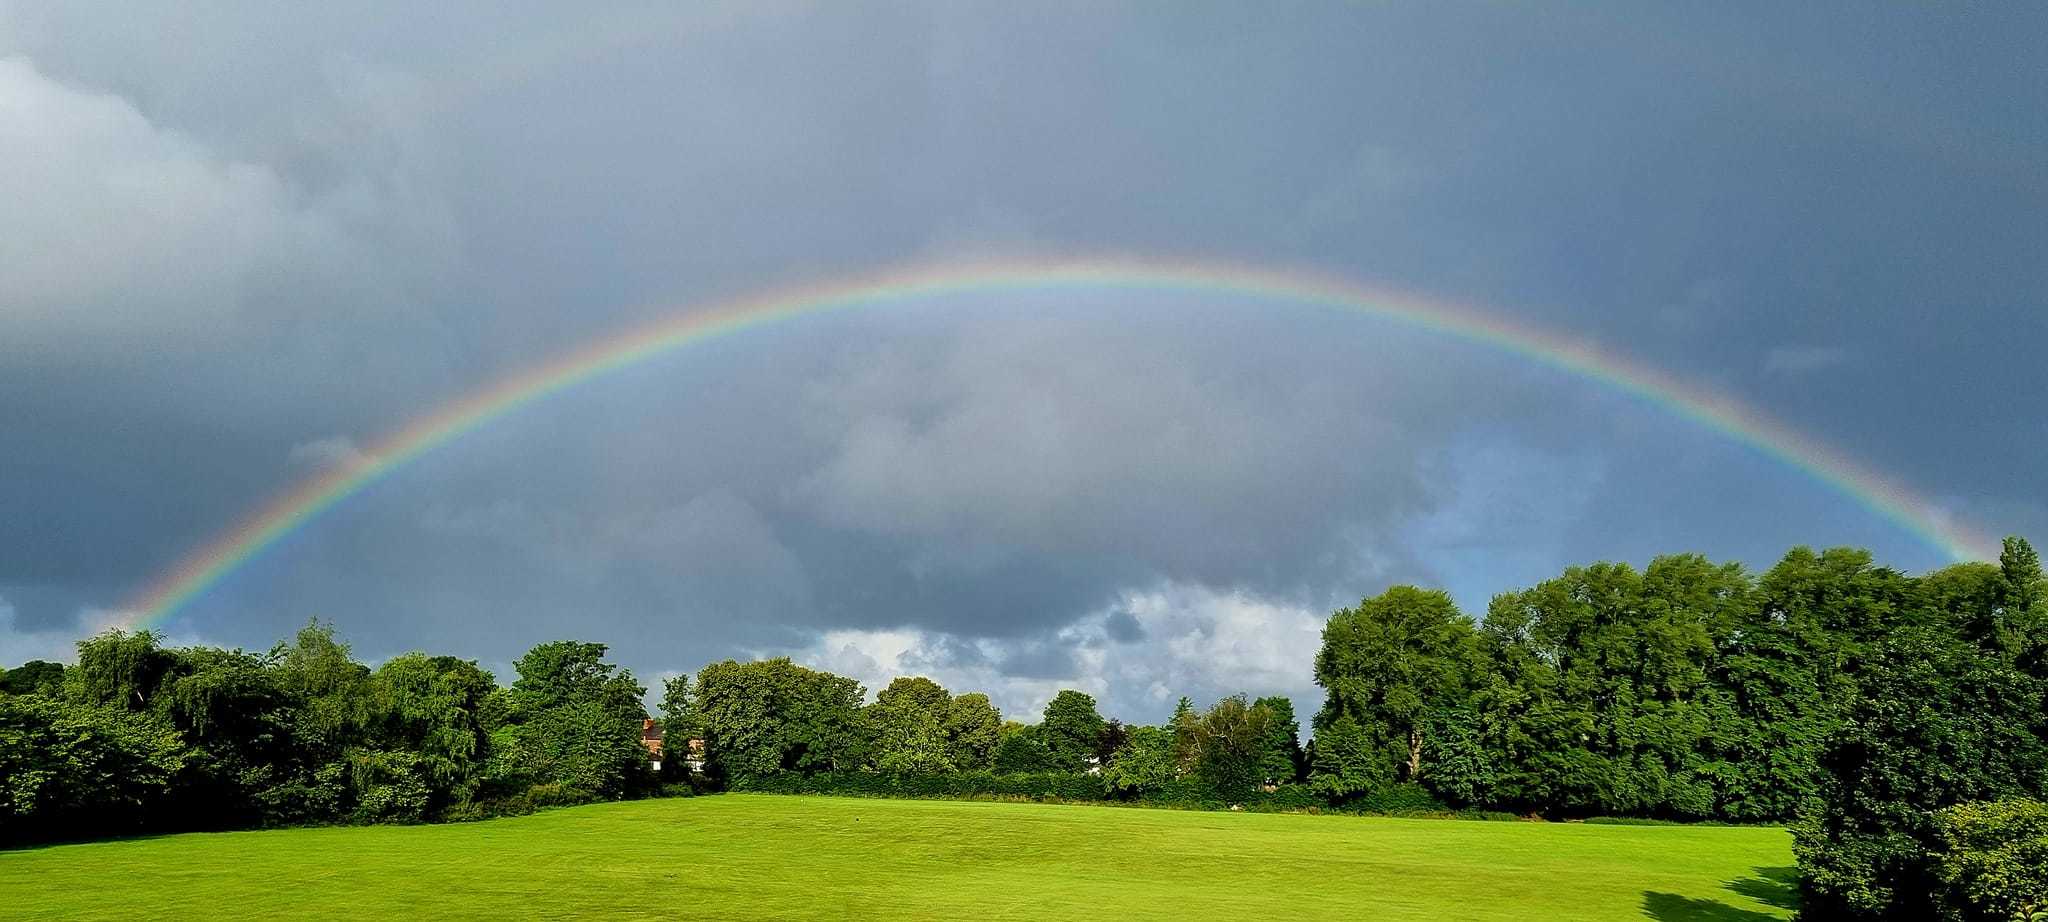 A rainbow in Eccleston by Mike Horton